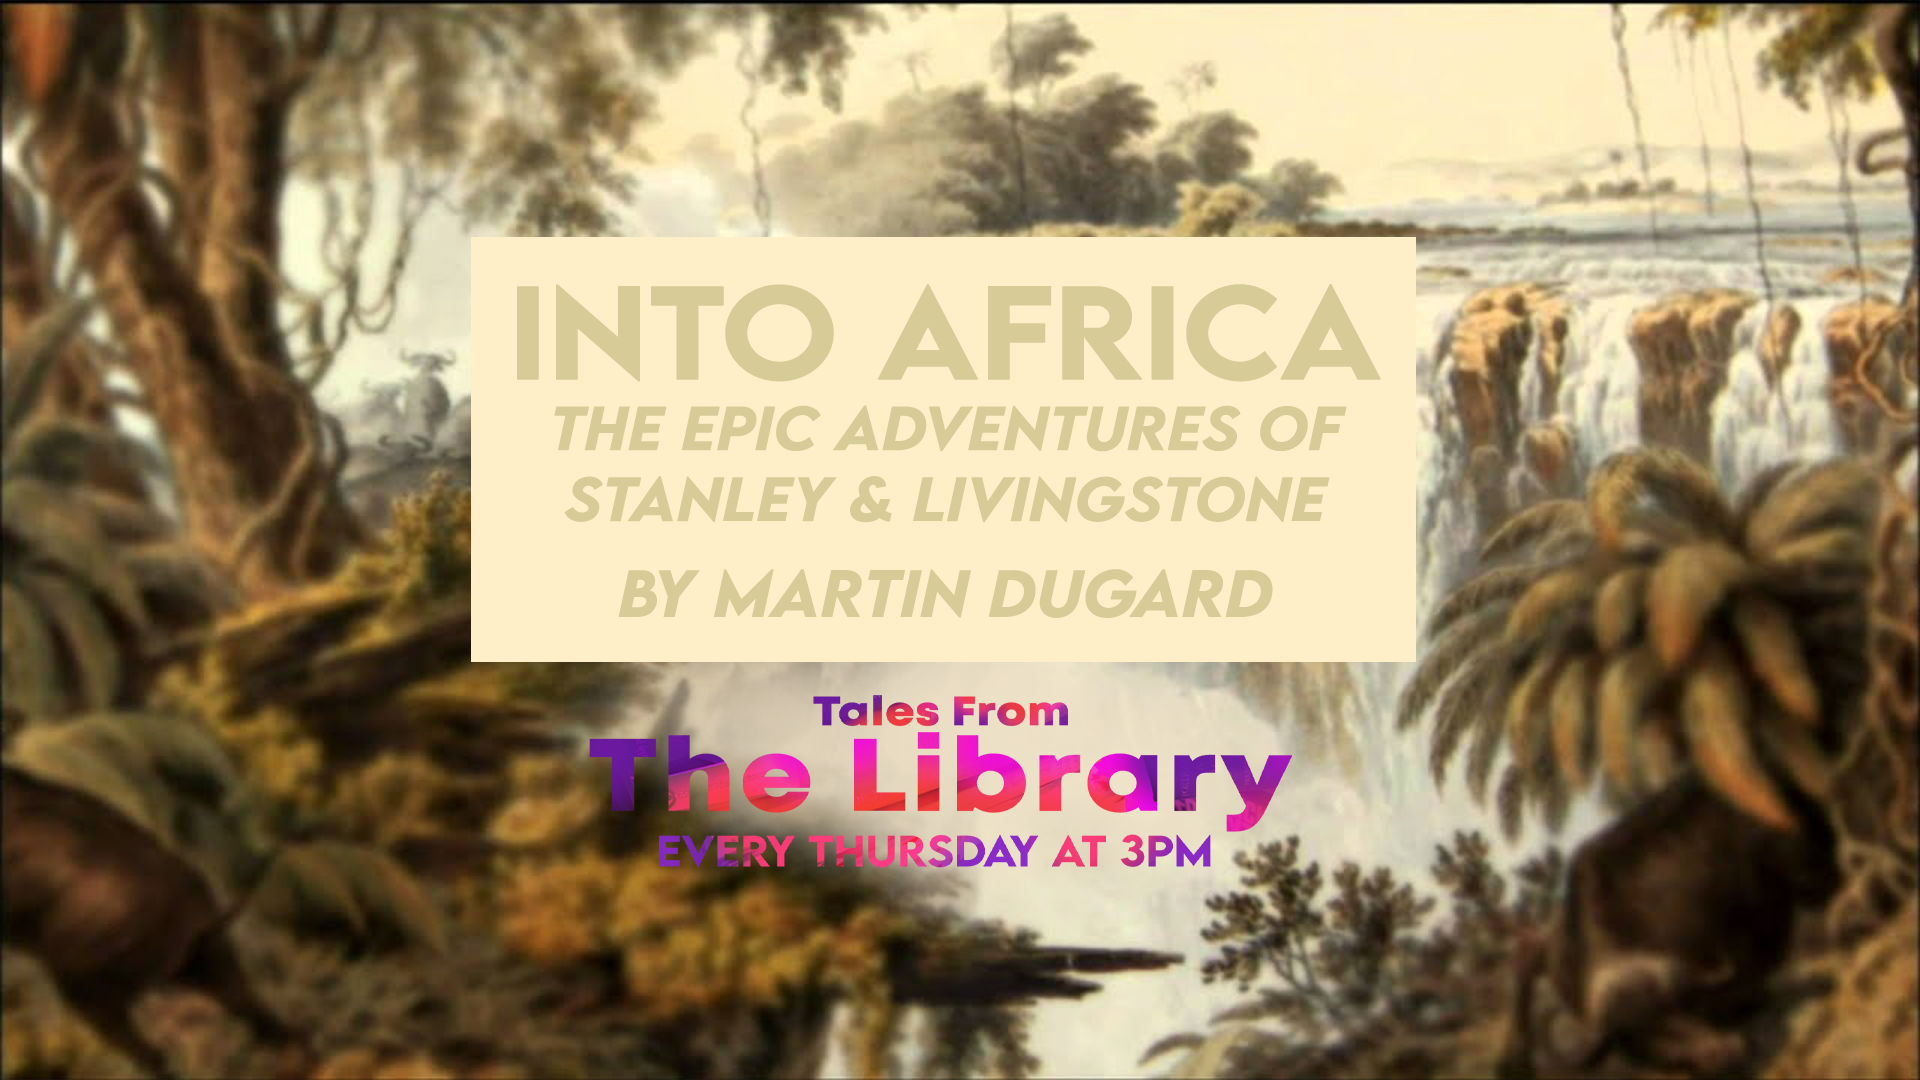 Tales From The Library - Into Africa